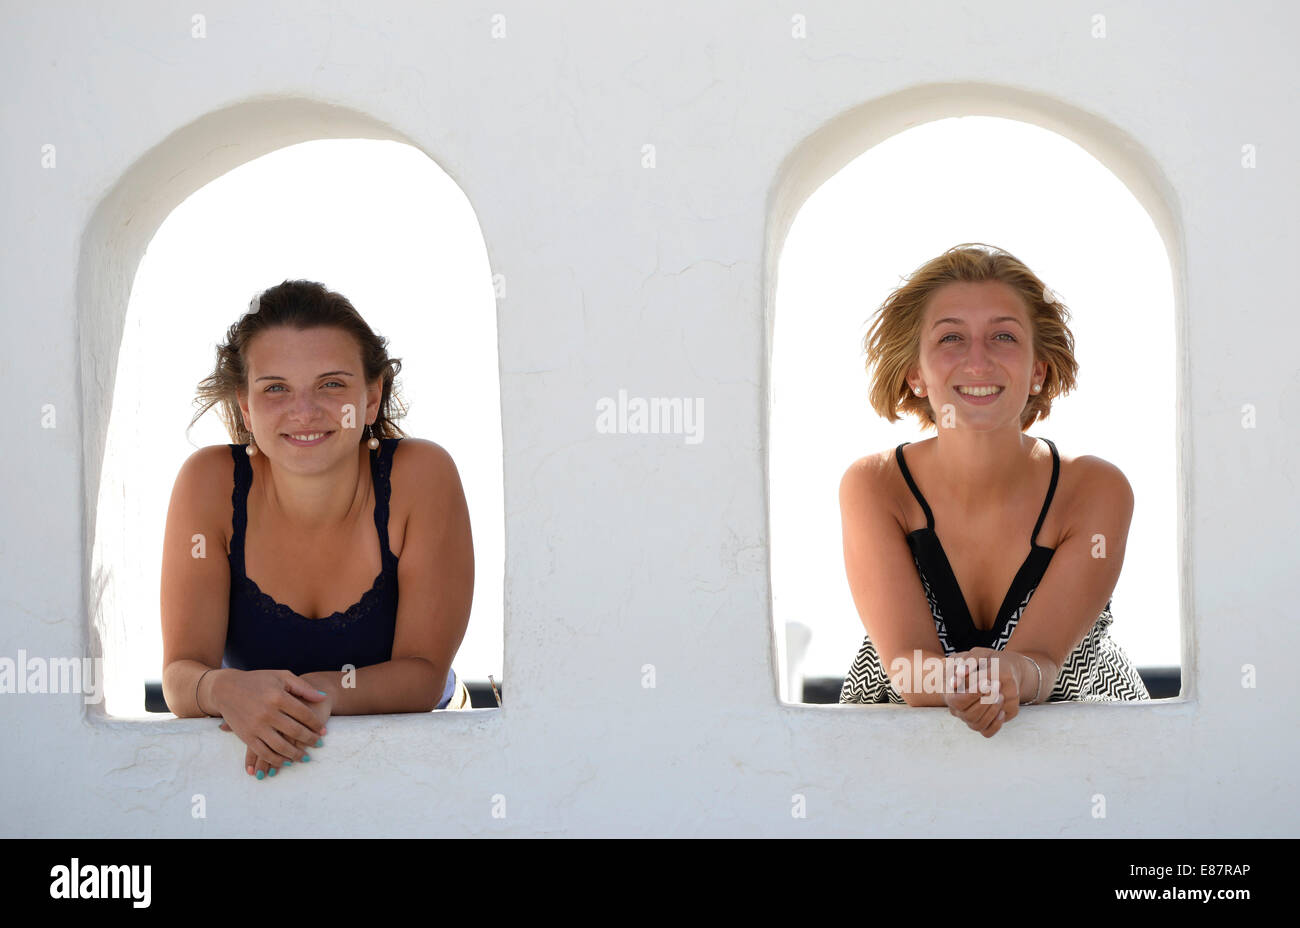 Two young women looking out from the Balcon de Femes, Femes, Lanzarote, Canary Islands, Spain Stock Photo